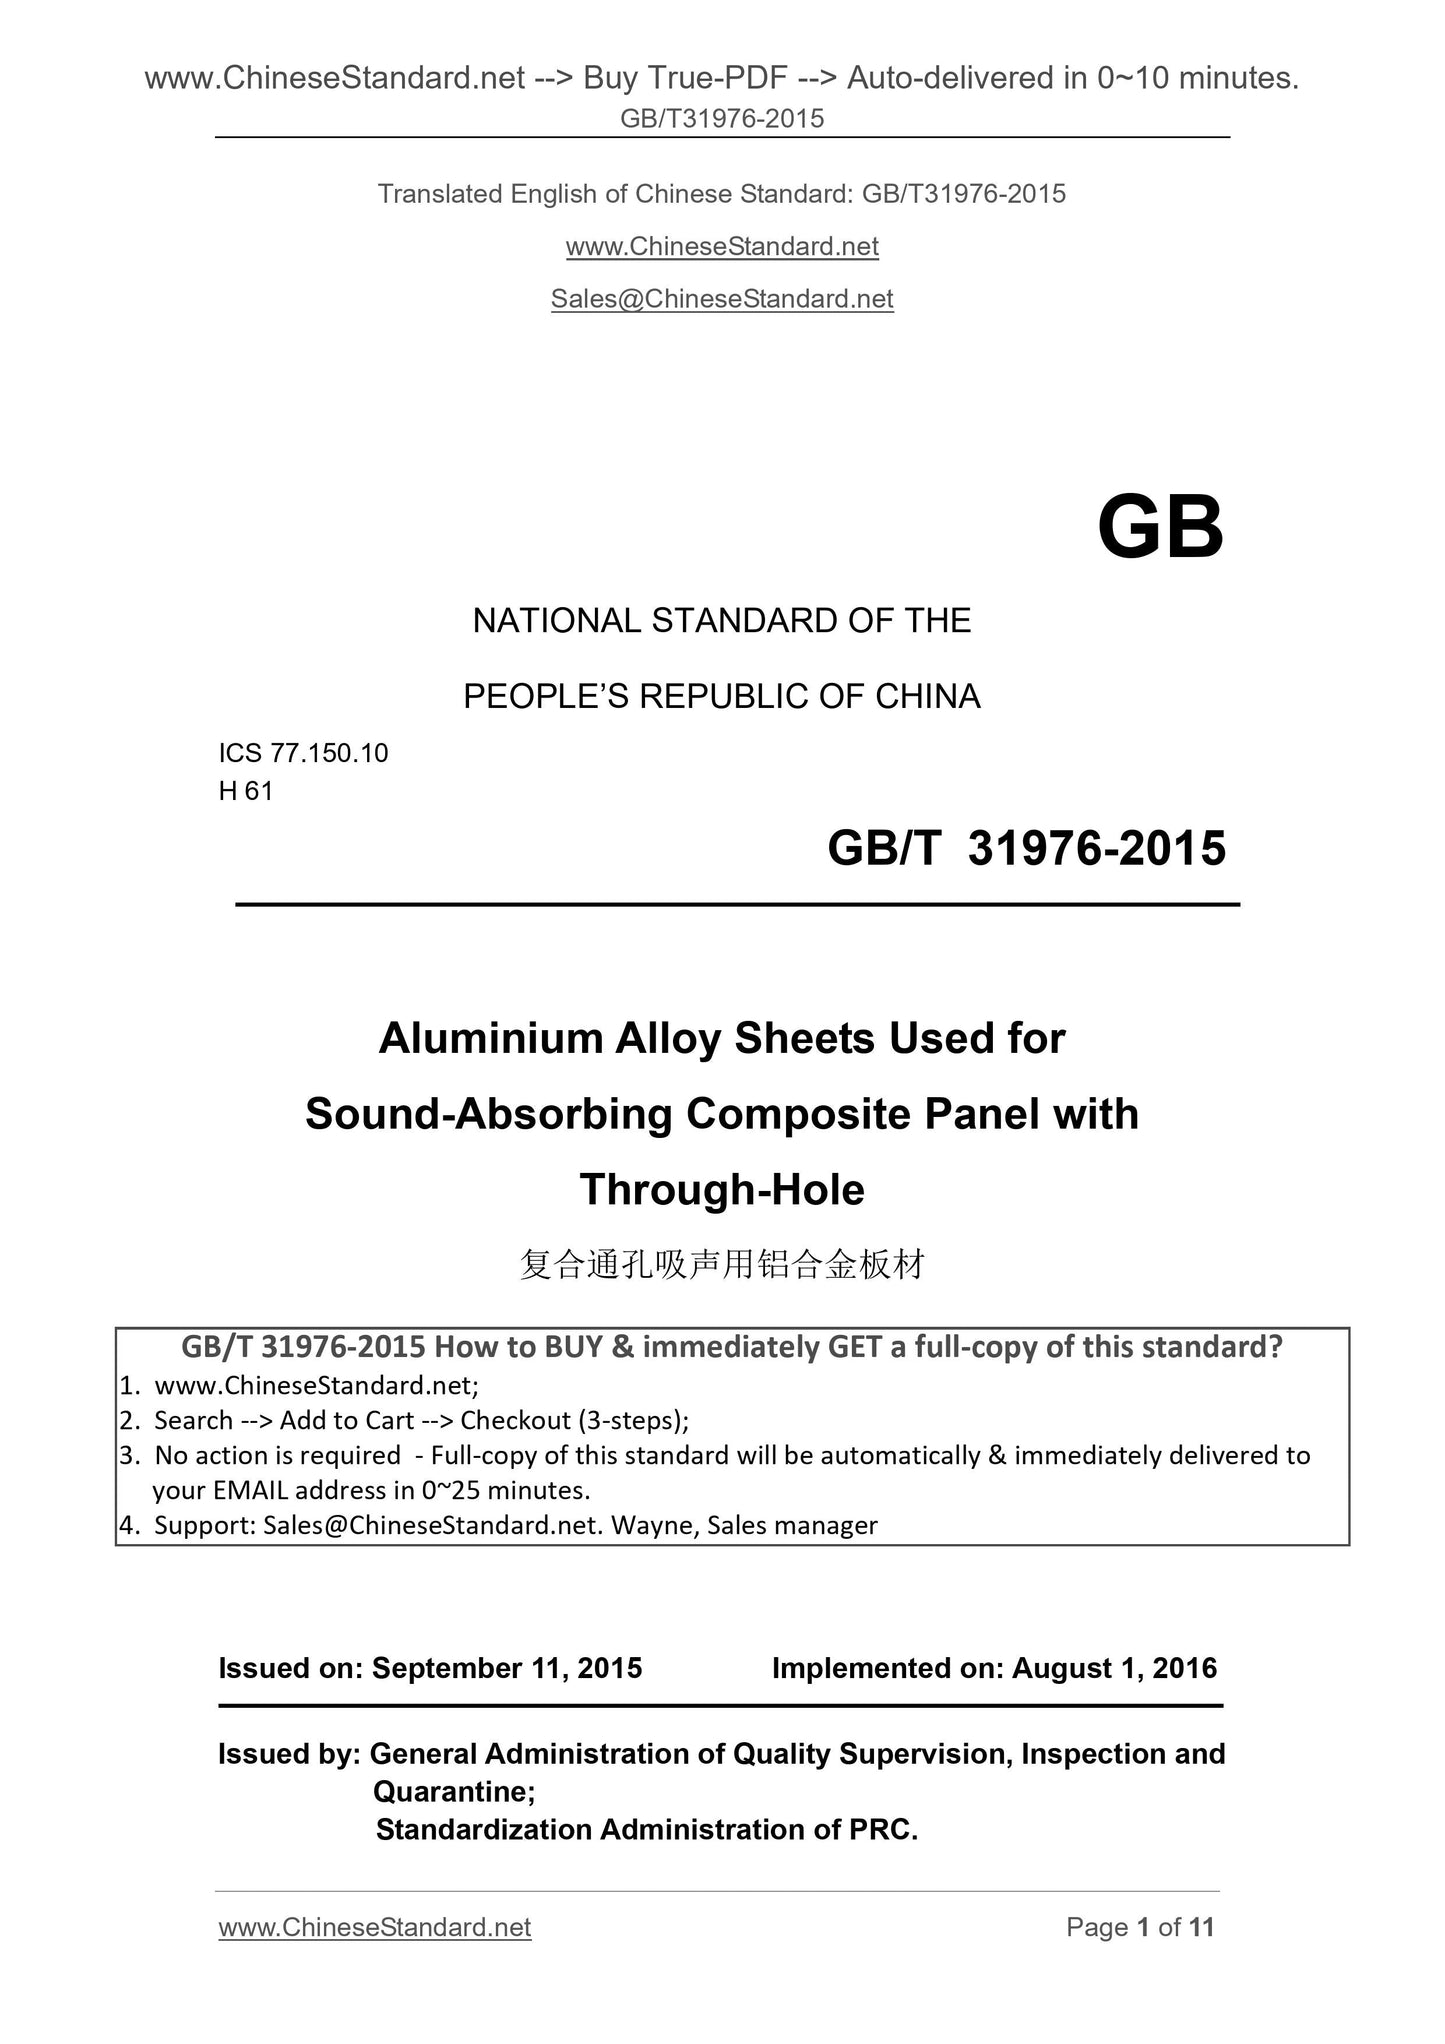 GB/T 31976-2015 Page 1